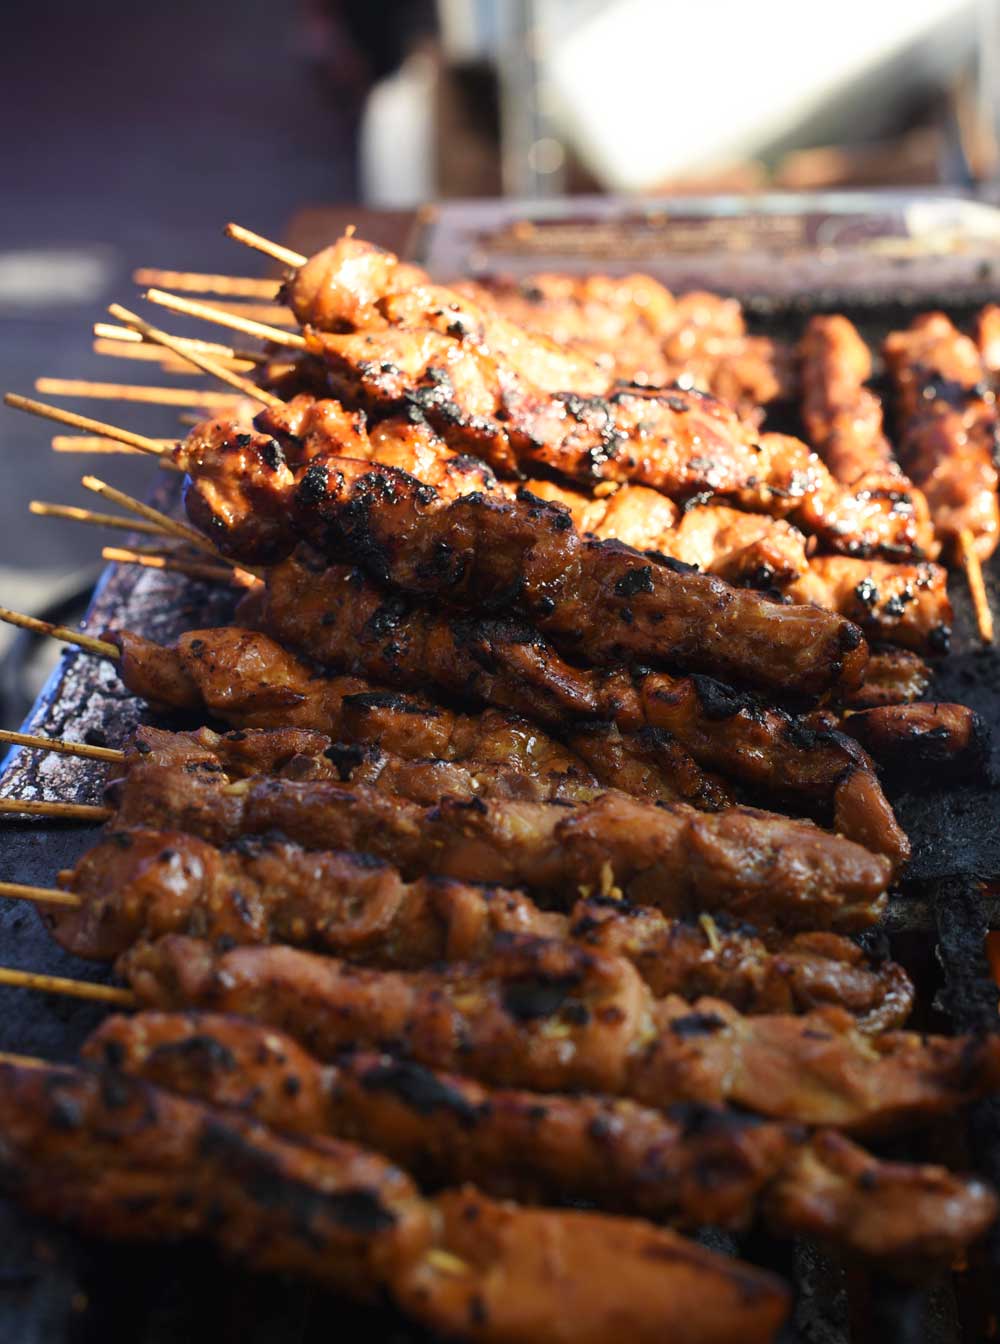 Chicken satays sizzle on an open air grill at the Satasfied food stand at Outside Lands in San Francisco.